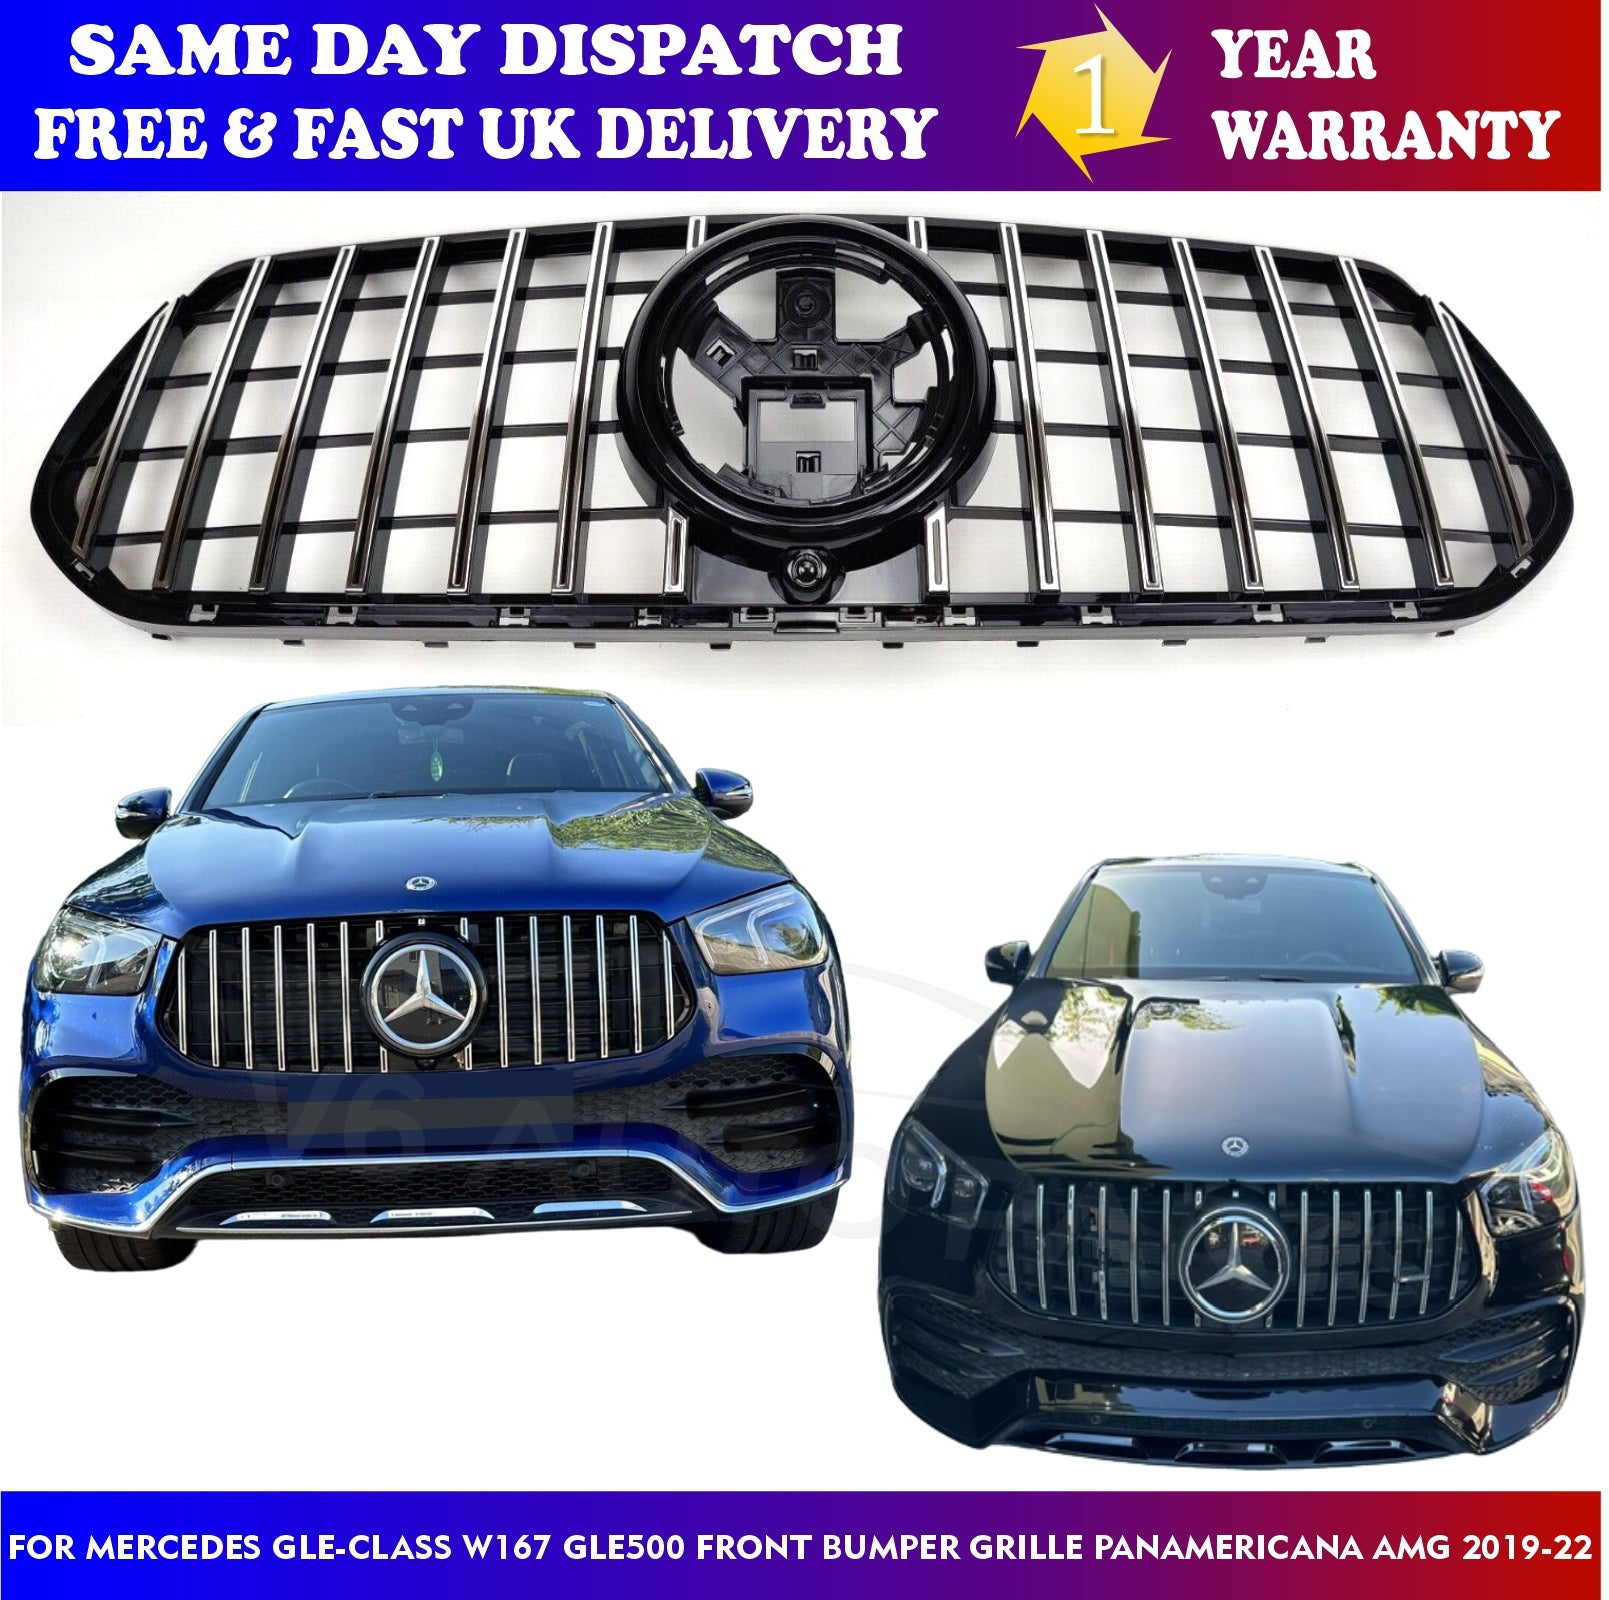 For Mercedes W167 GLE-Class GLE350 Front Bumper Grille Panamericana AMG 2019-22